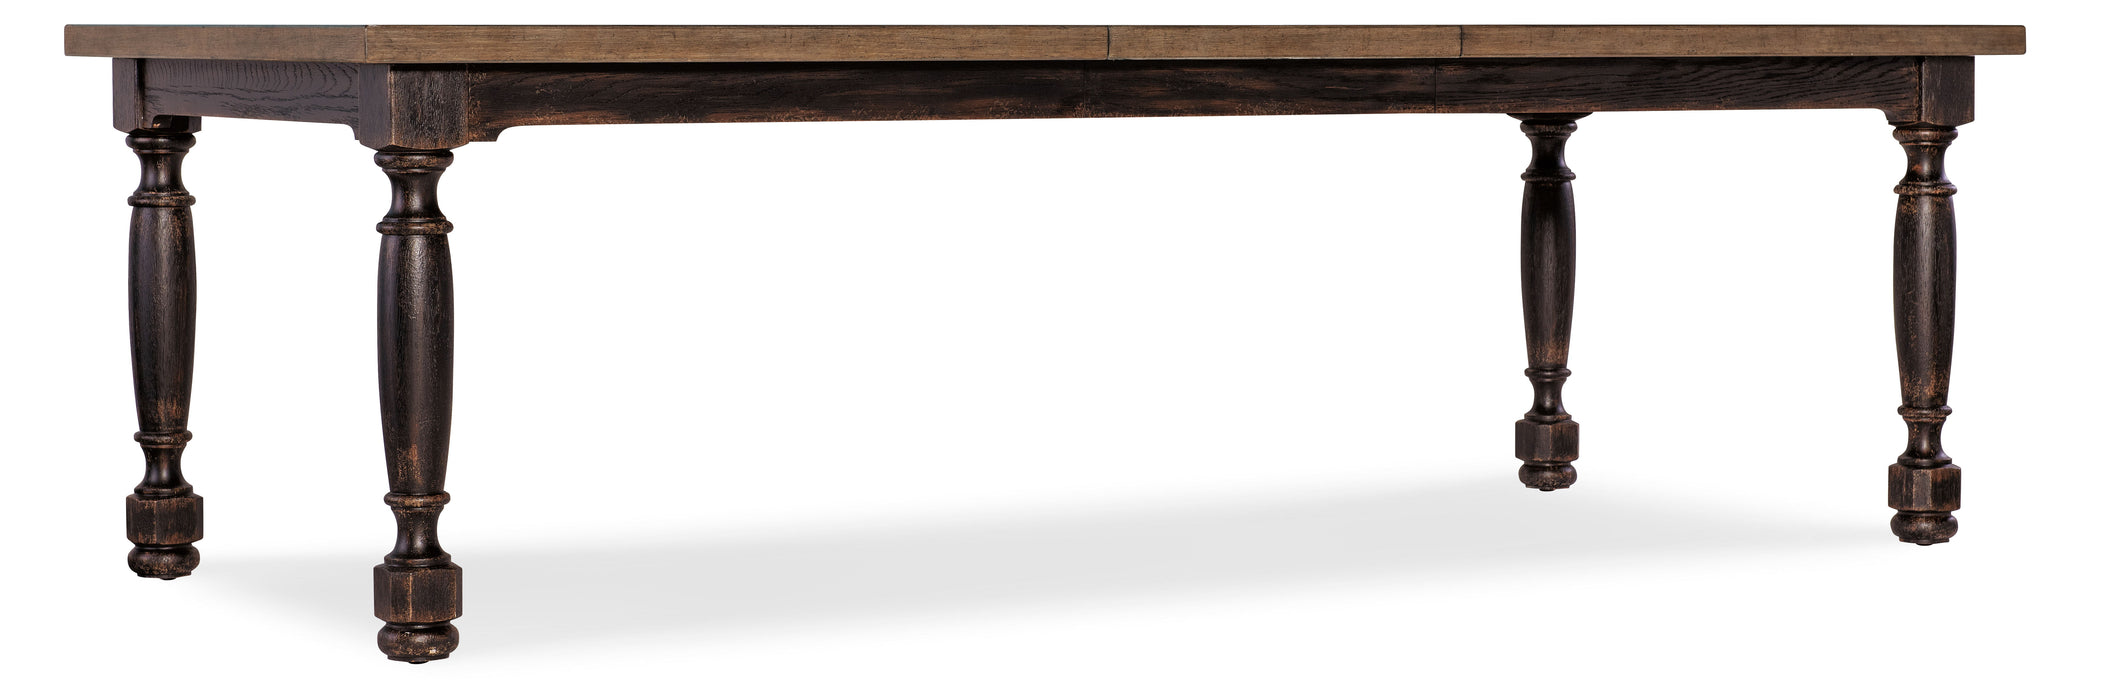 Americana - Leg Dining Table With One 22" Leaf